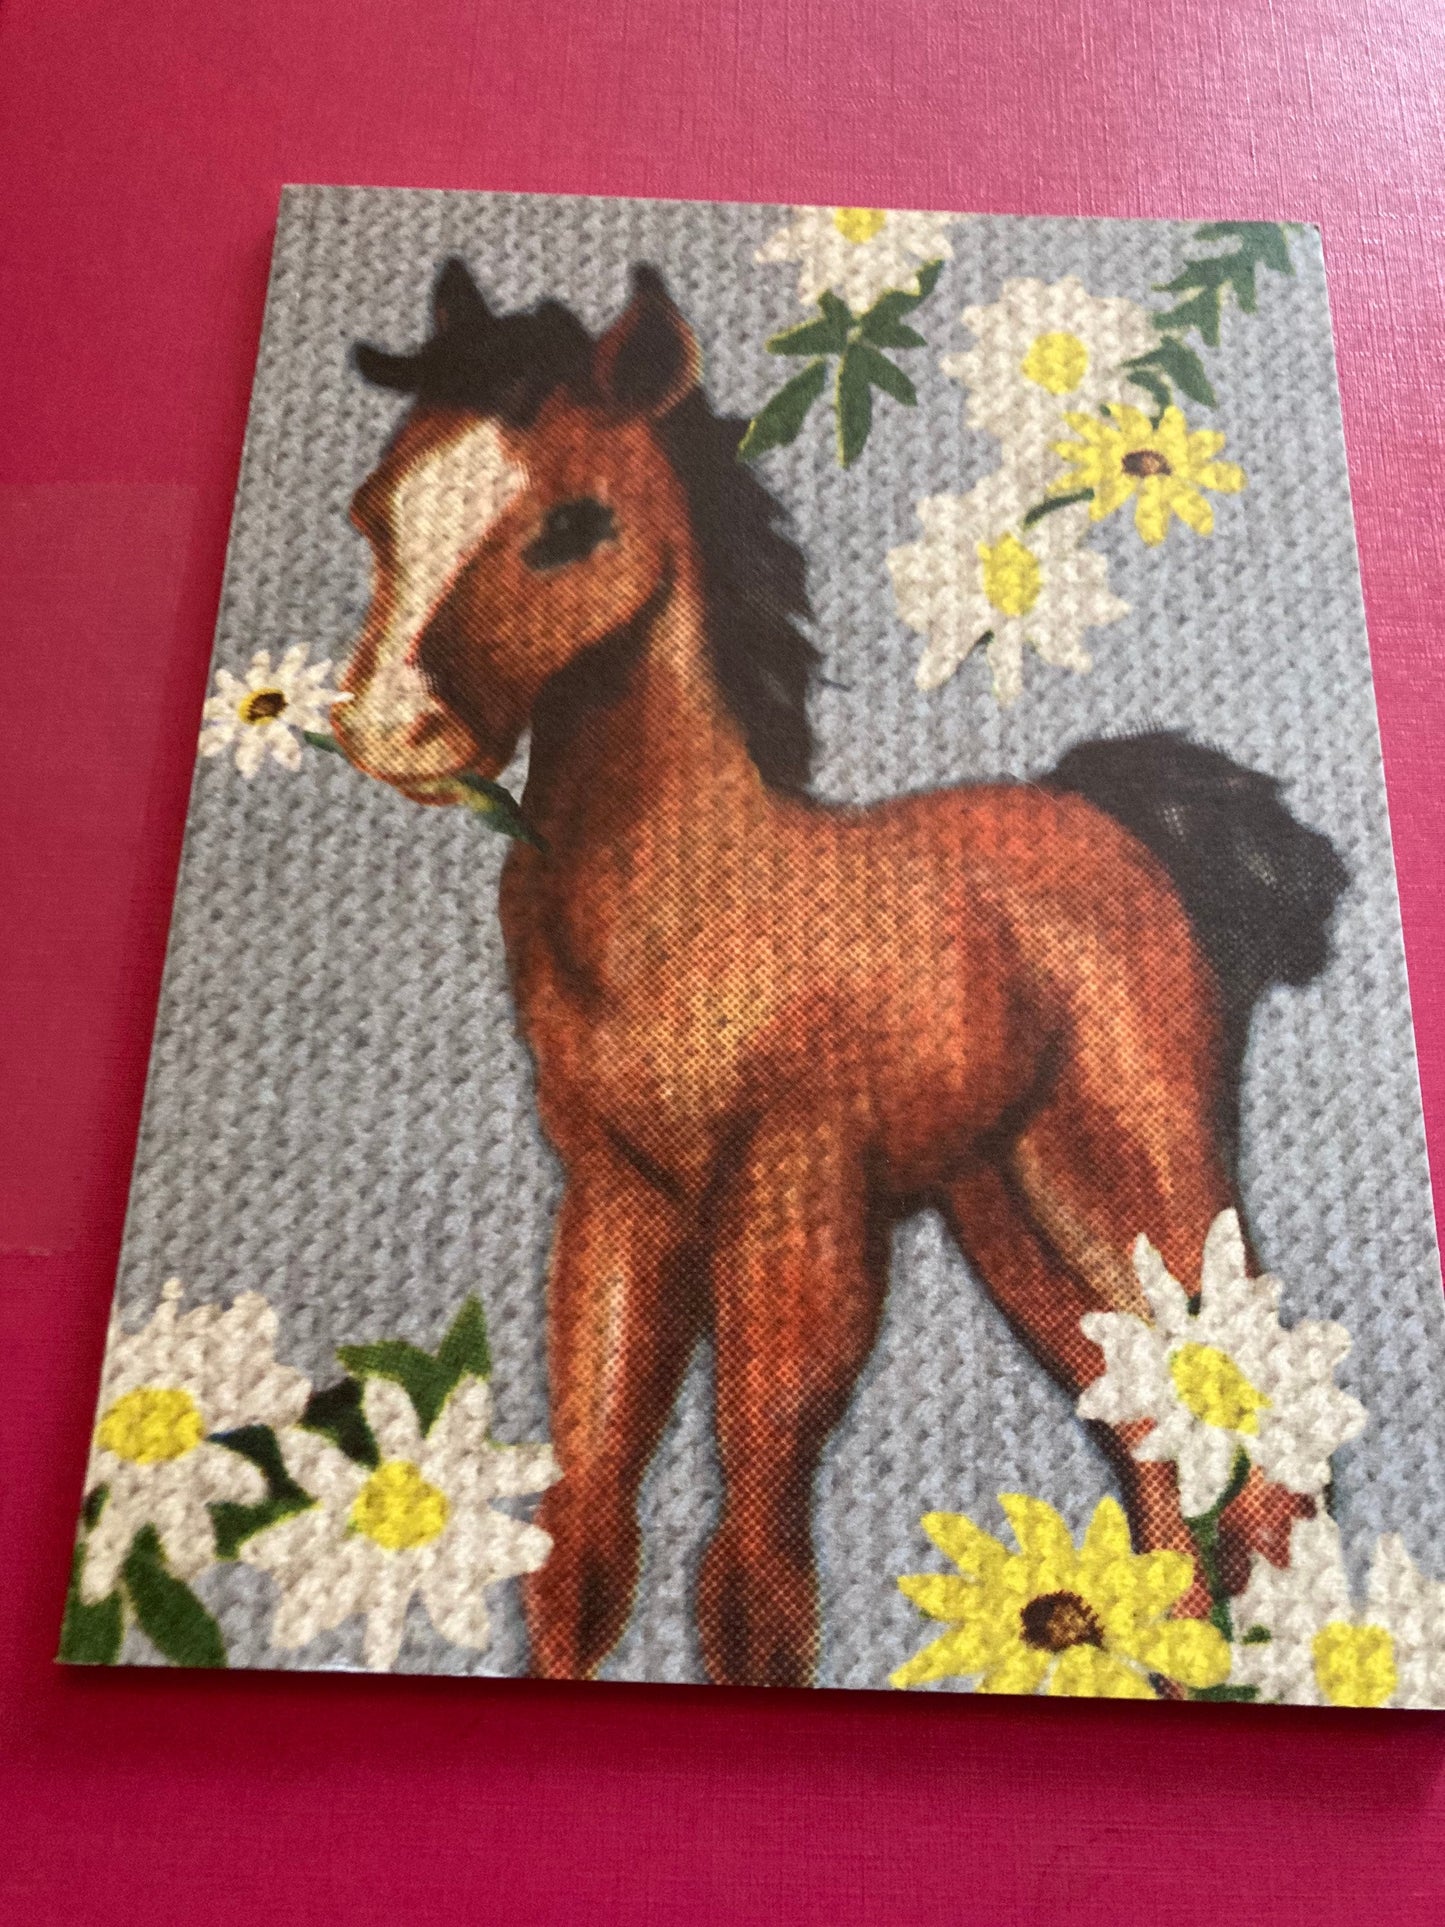 Note book book Cute pony horse 14 x 18cm Plain drawing book journal sketch book Retro Madame chalet kitsch Swiss vintage designs 24 pages